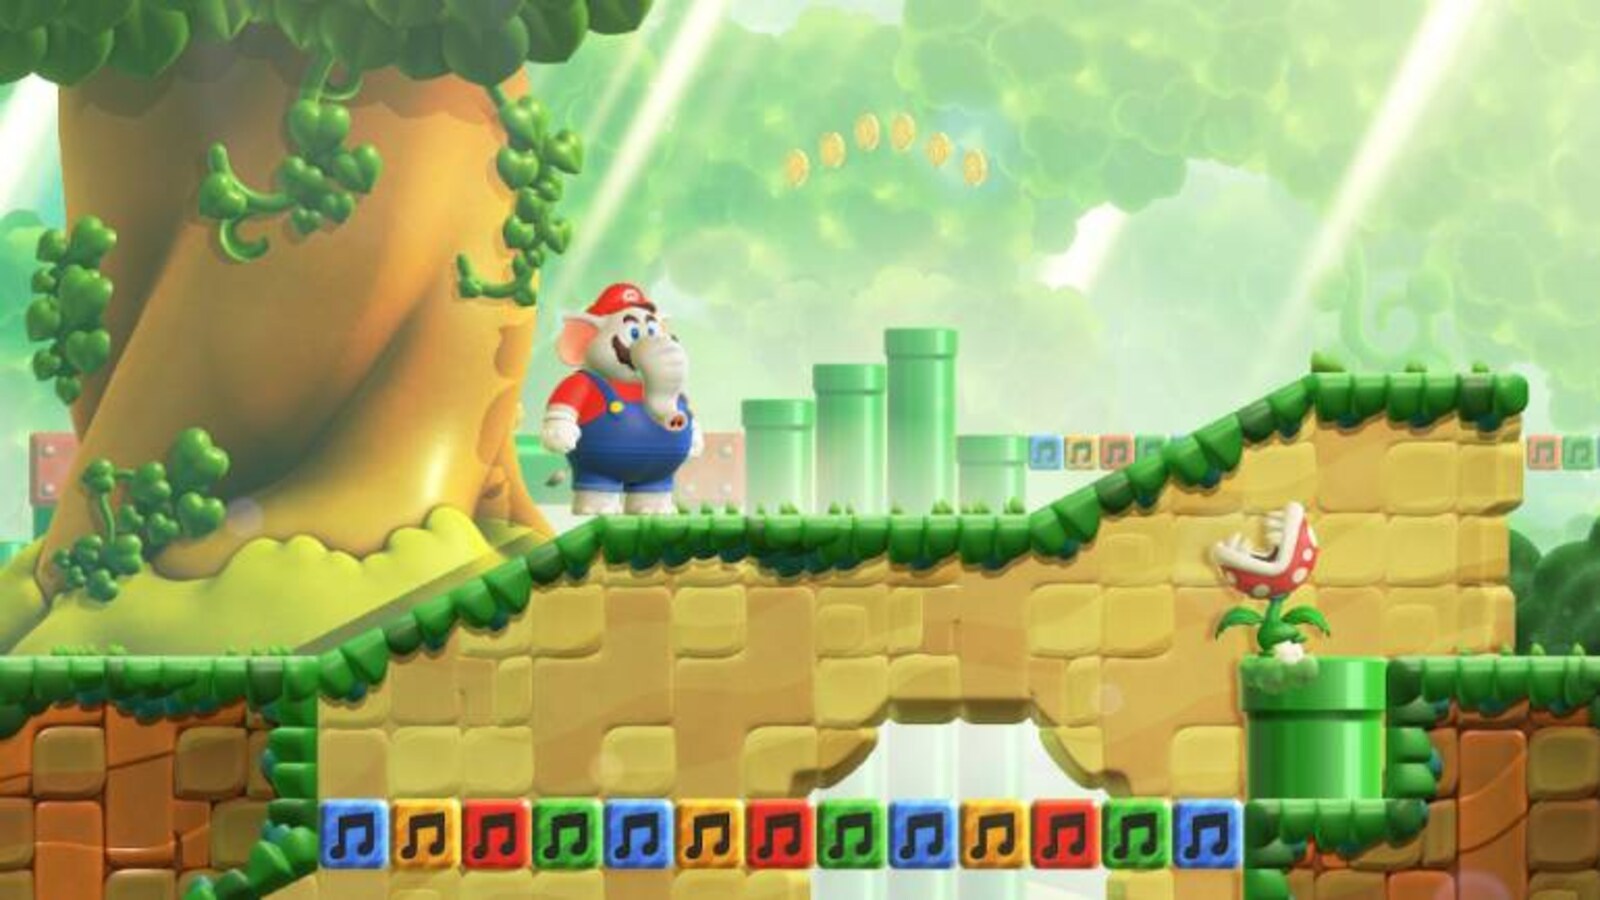 What Review Score Would You Give Super Mario Bros. Wonder?